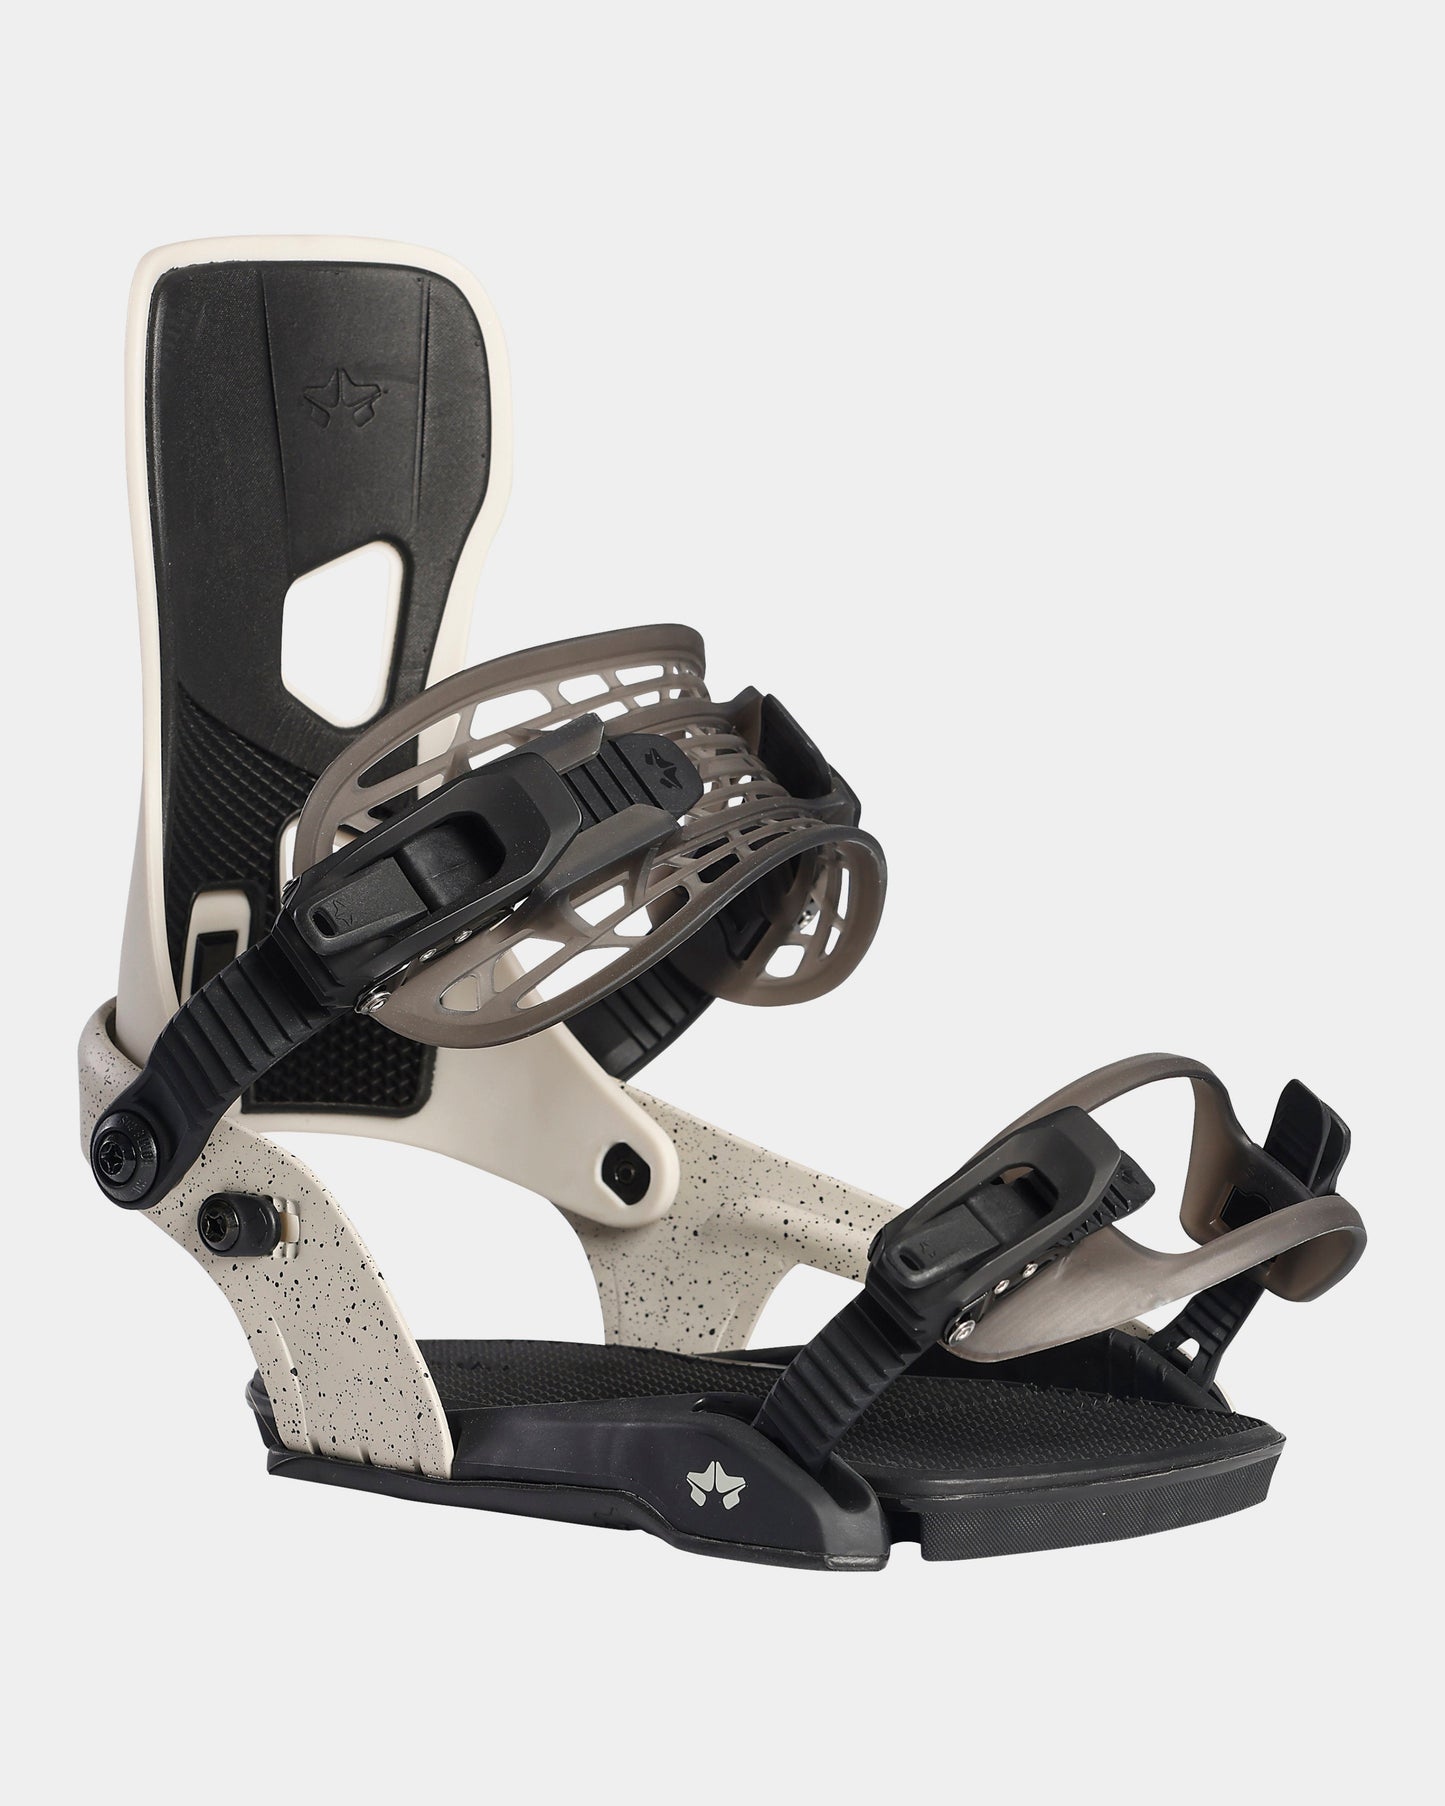 Rome Crux bindings 2022 mens snowboard bindings product photo from the front cover shot in the studio color bone white